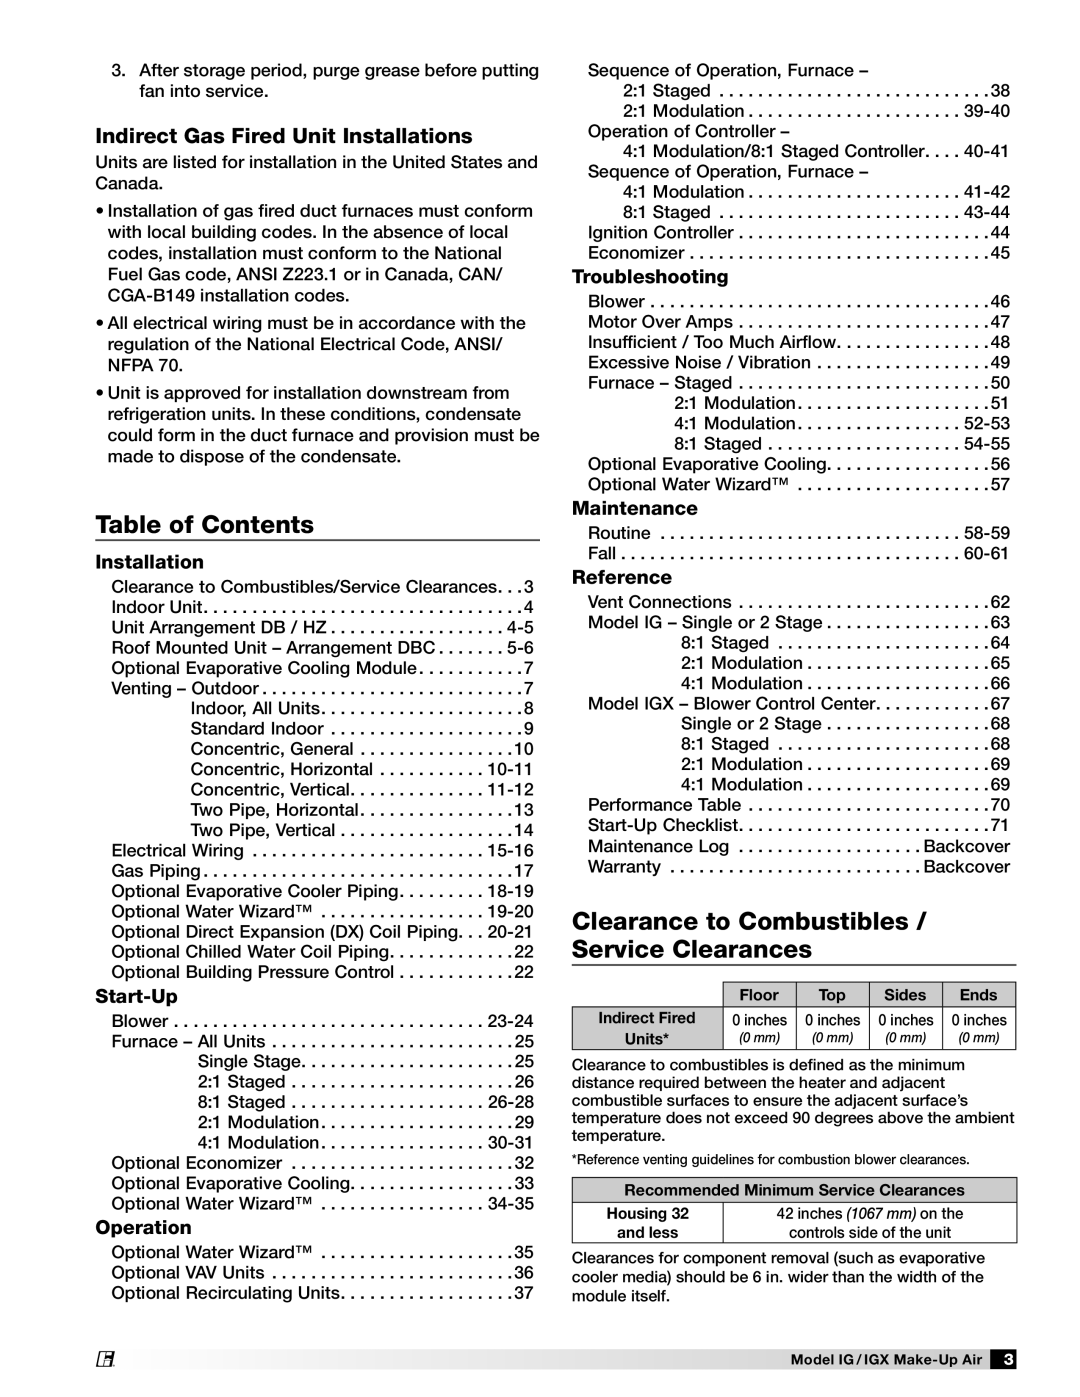 Greenheck Fan 470656 Table of Contents, Clearance to Combustibles / Service Clearances, Installation, Start-Up, Operation 